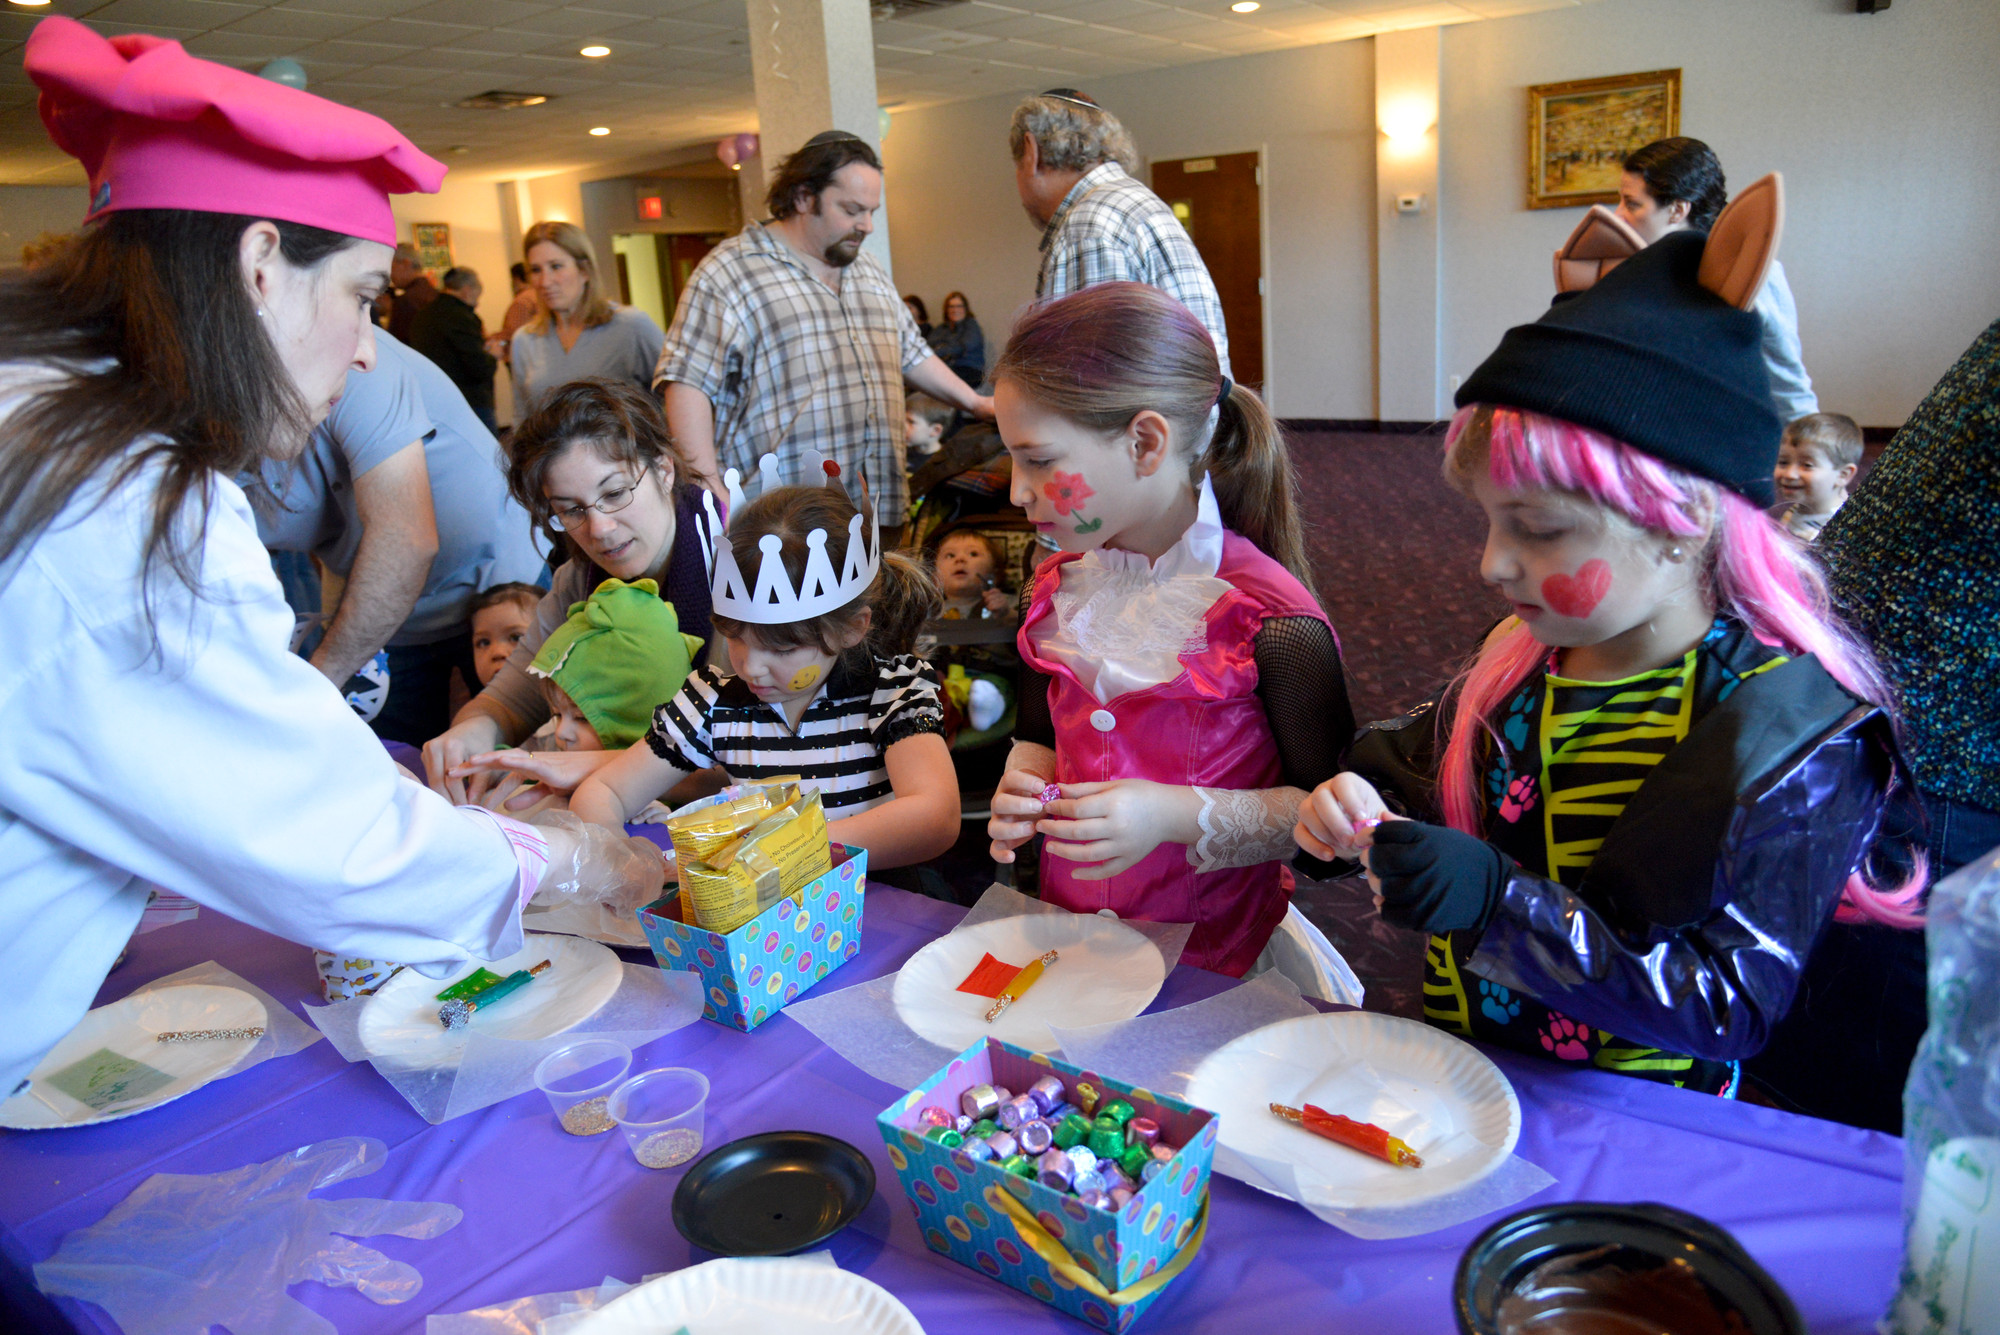 Paula Gottlieb Herman, left, created edible crafts with Chelsey Fenster, 4, center, Sarah Lazerson, 6, and Alexandra Fenster 6, at the East Meadow Jewish Center’s third annual Purim With a Purpose children’s event. The fundraiser netted $3,300 which will be dispersed to two children’s charities.